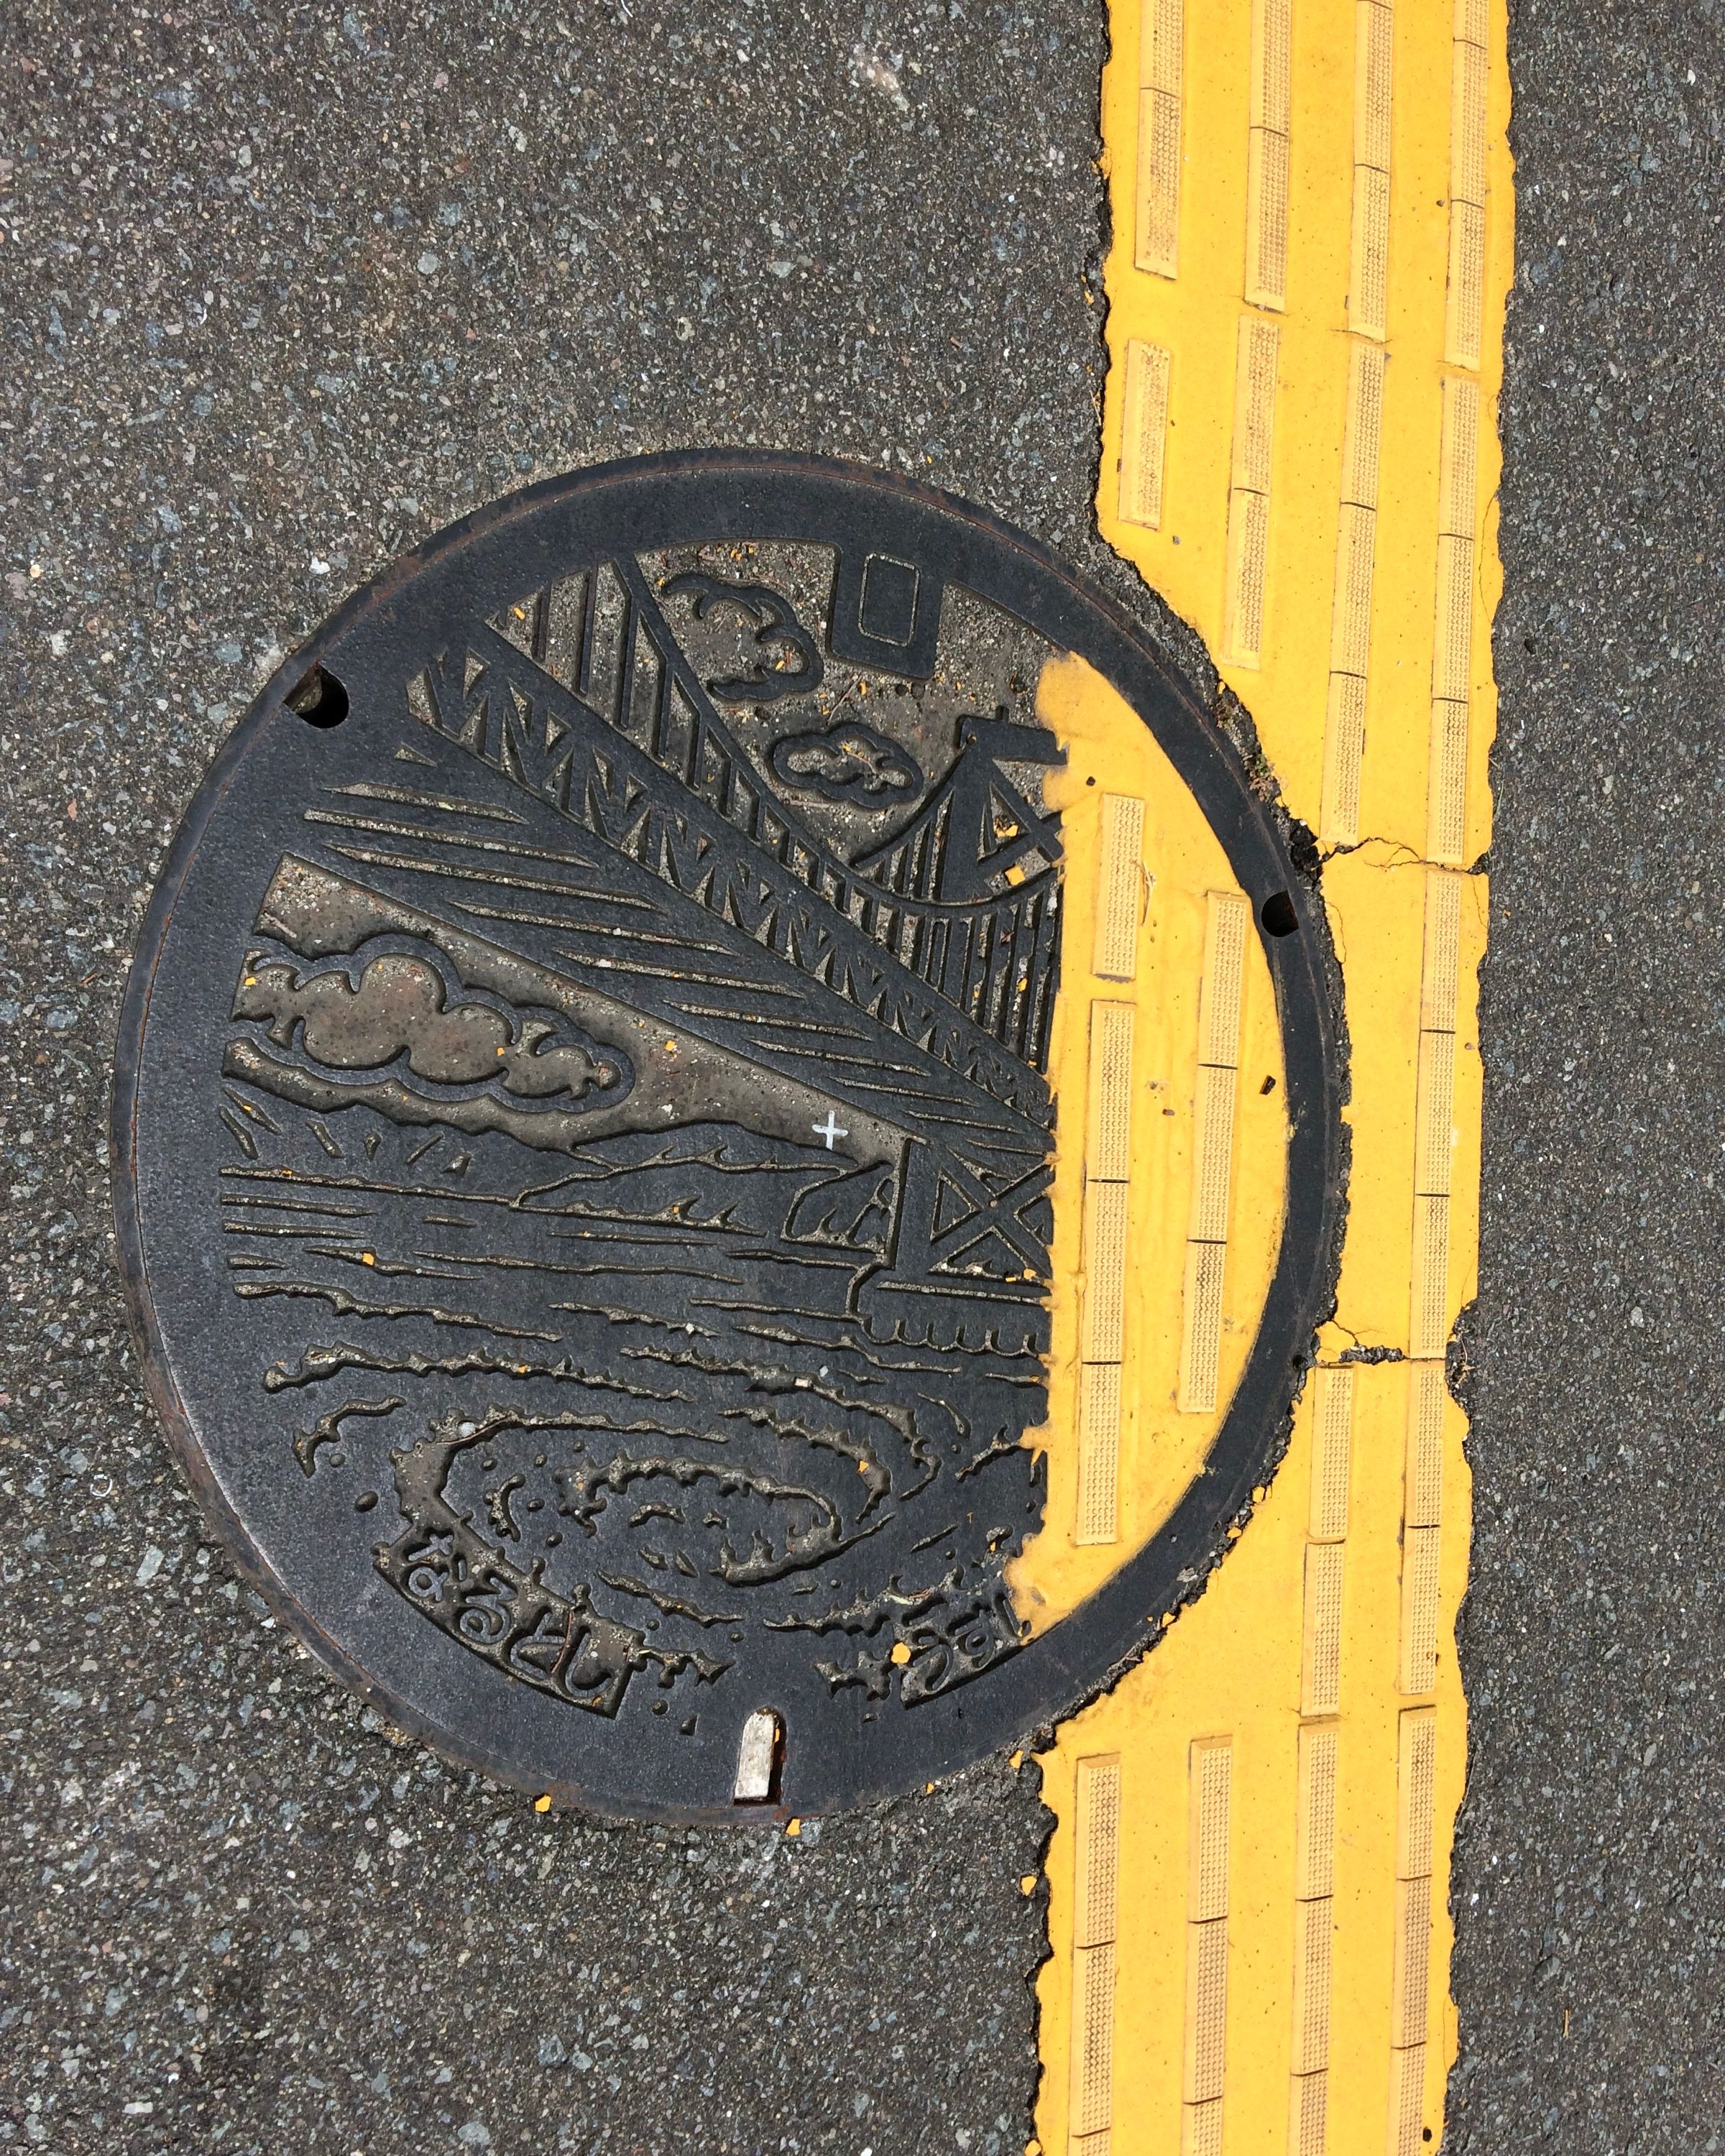 Manhole cover with the Great Naruto Bridge and the Naruto Whirlpools on it.